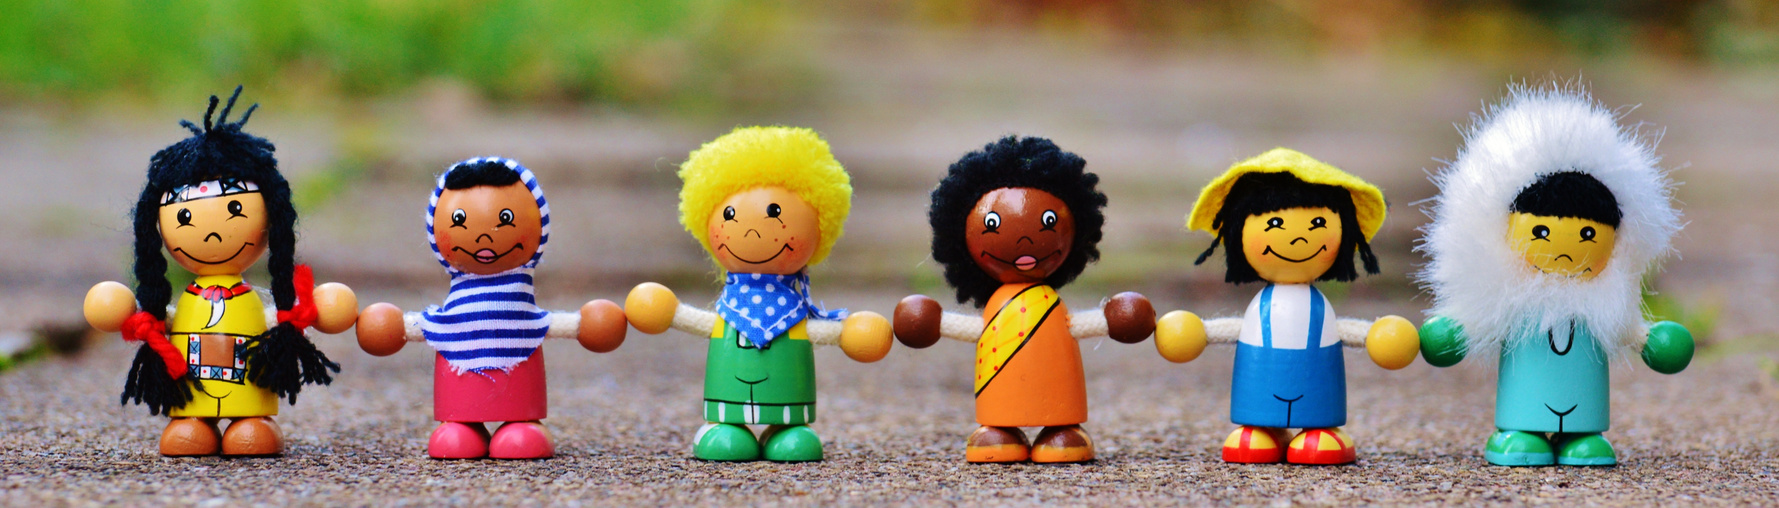 Toys with Different Nationalities